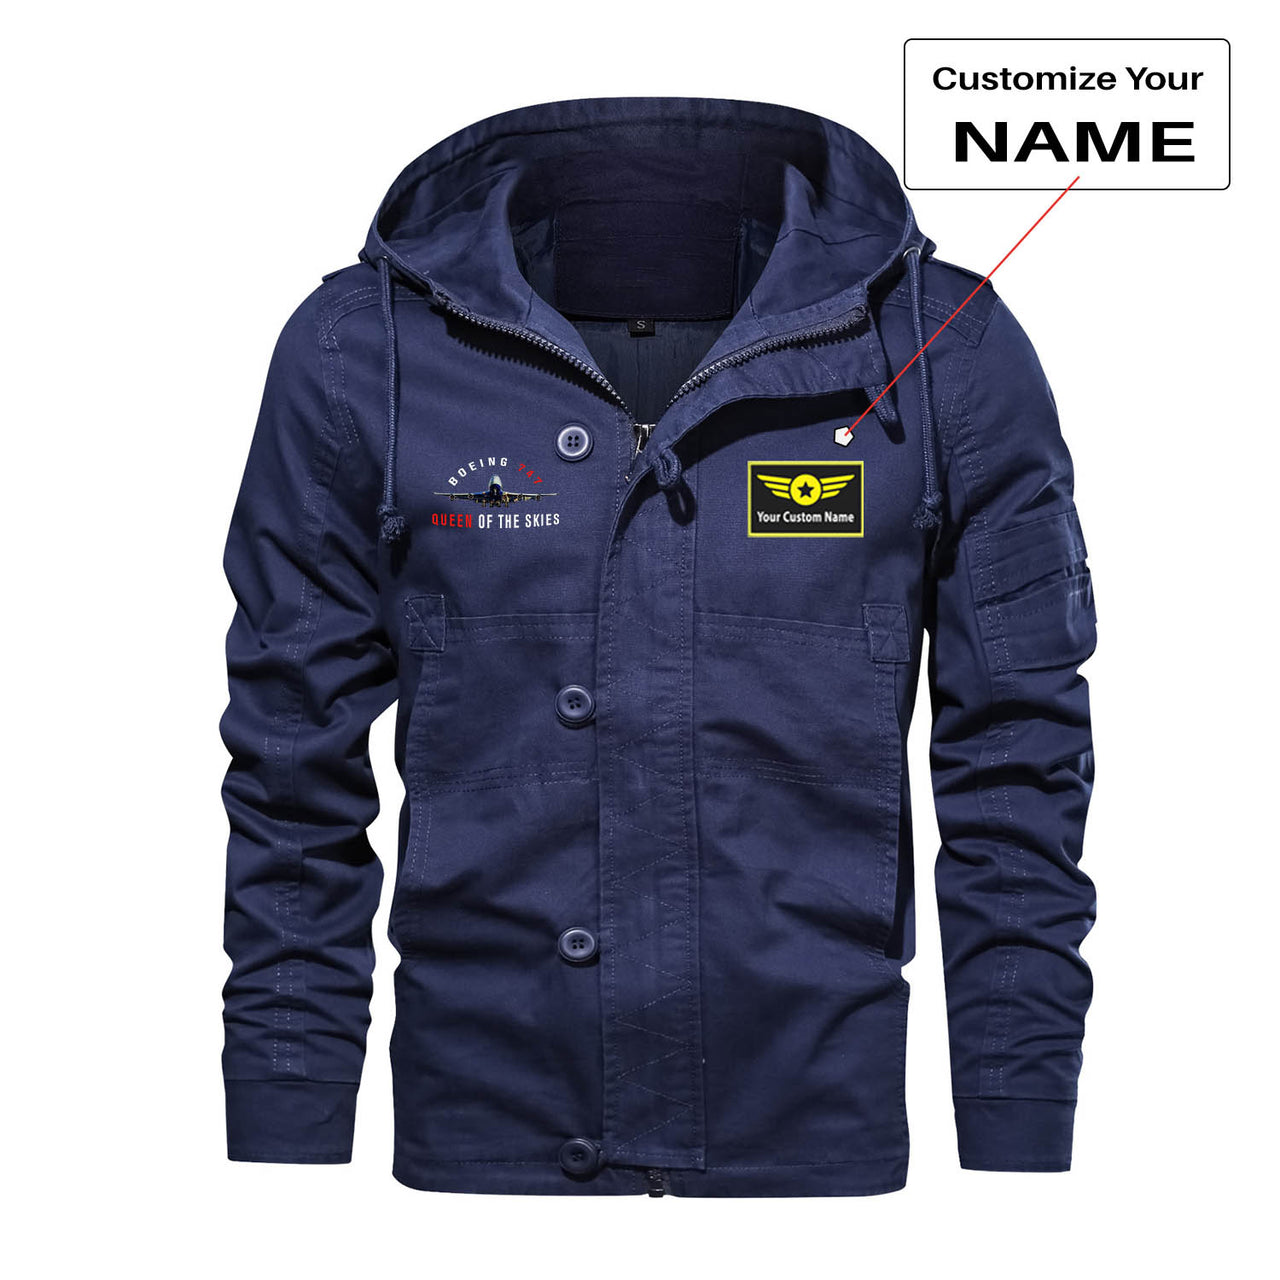 Boeing 747 Queen of the Skies Designed Cotton Jackets